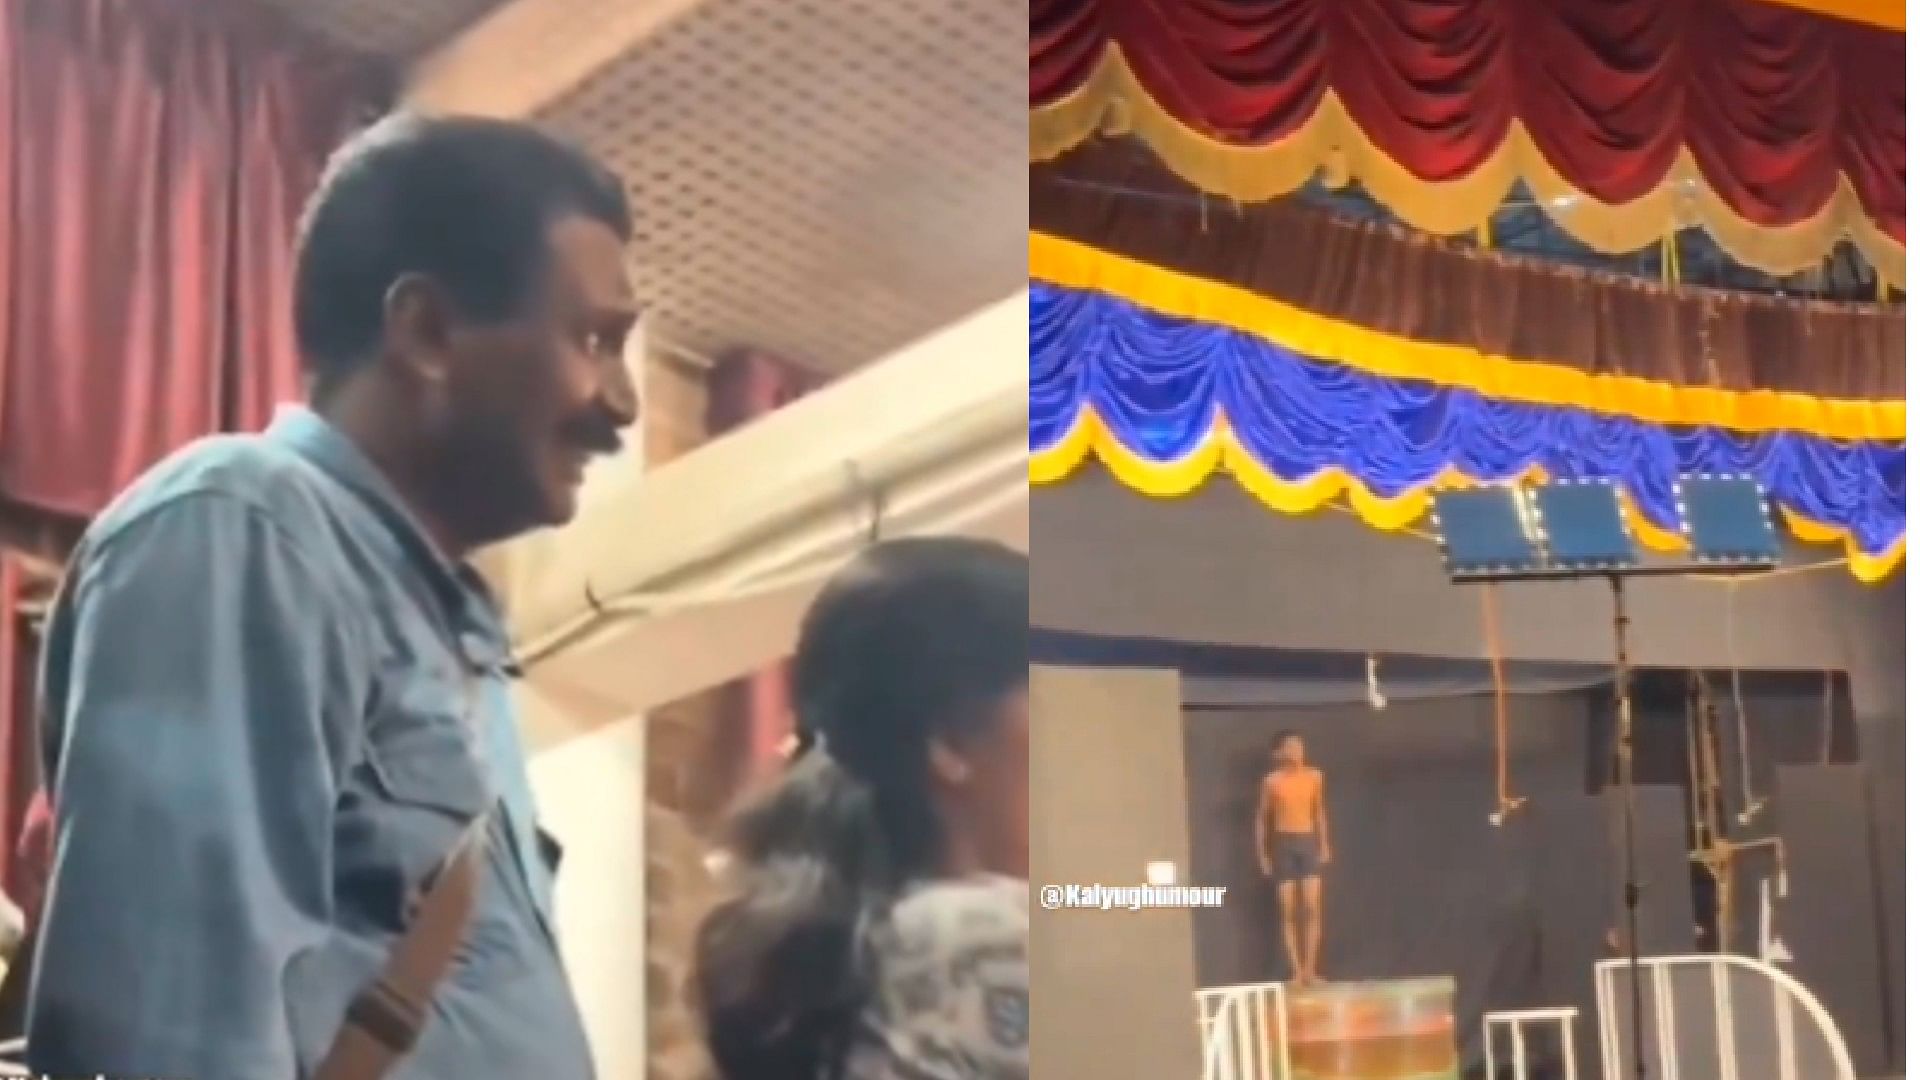 Viral Video: Father Got Emotional After Watching Son Performance Video Going Viral